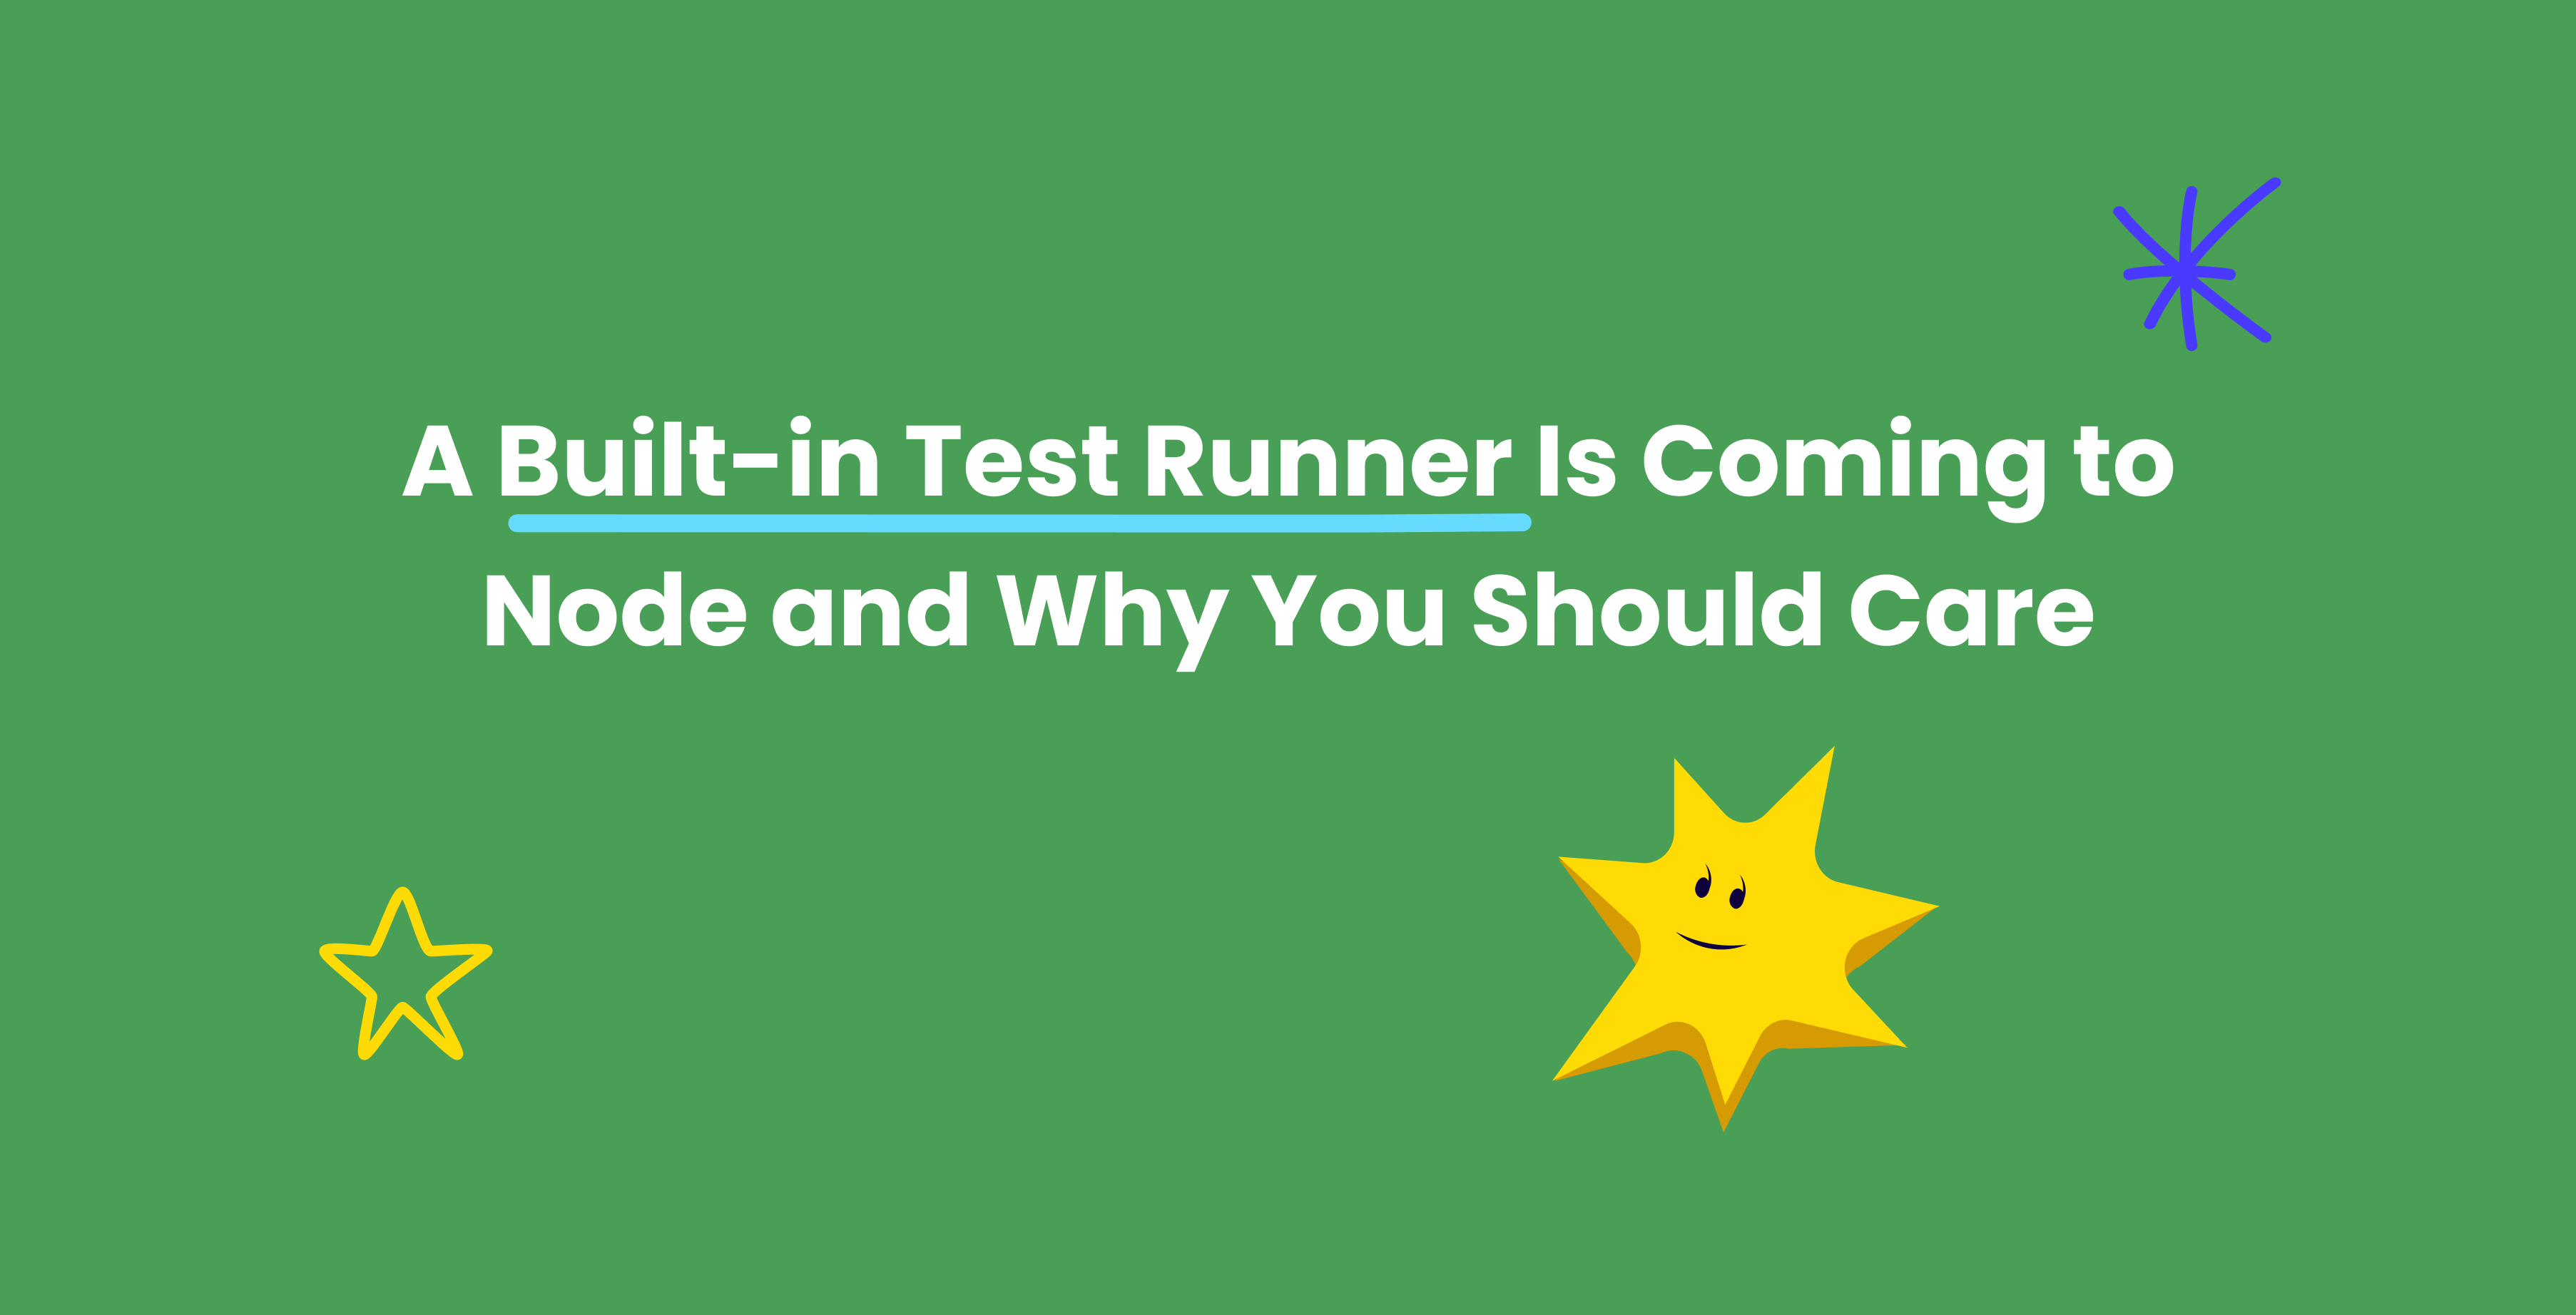 A Built-in Test Runner Is Coming to Node and Why You Should Care